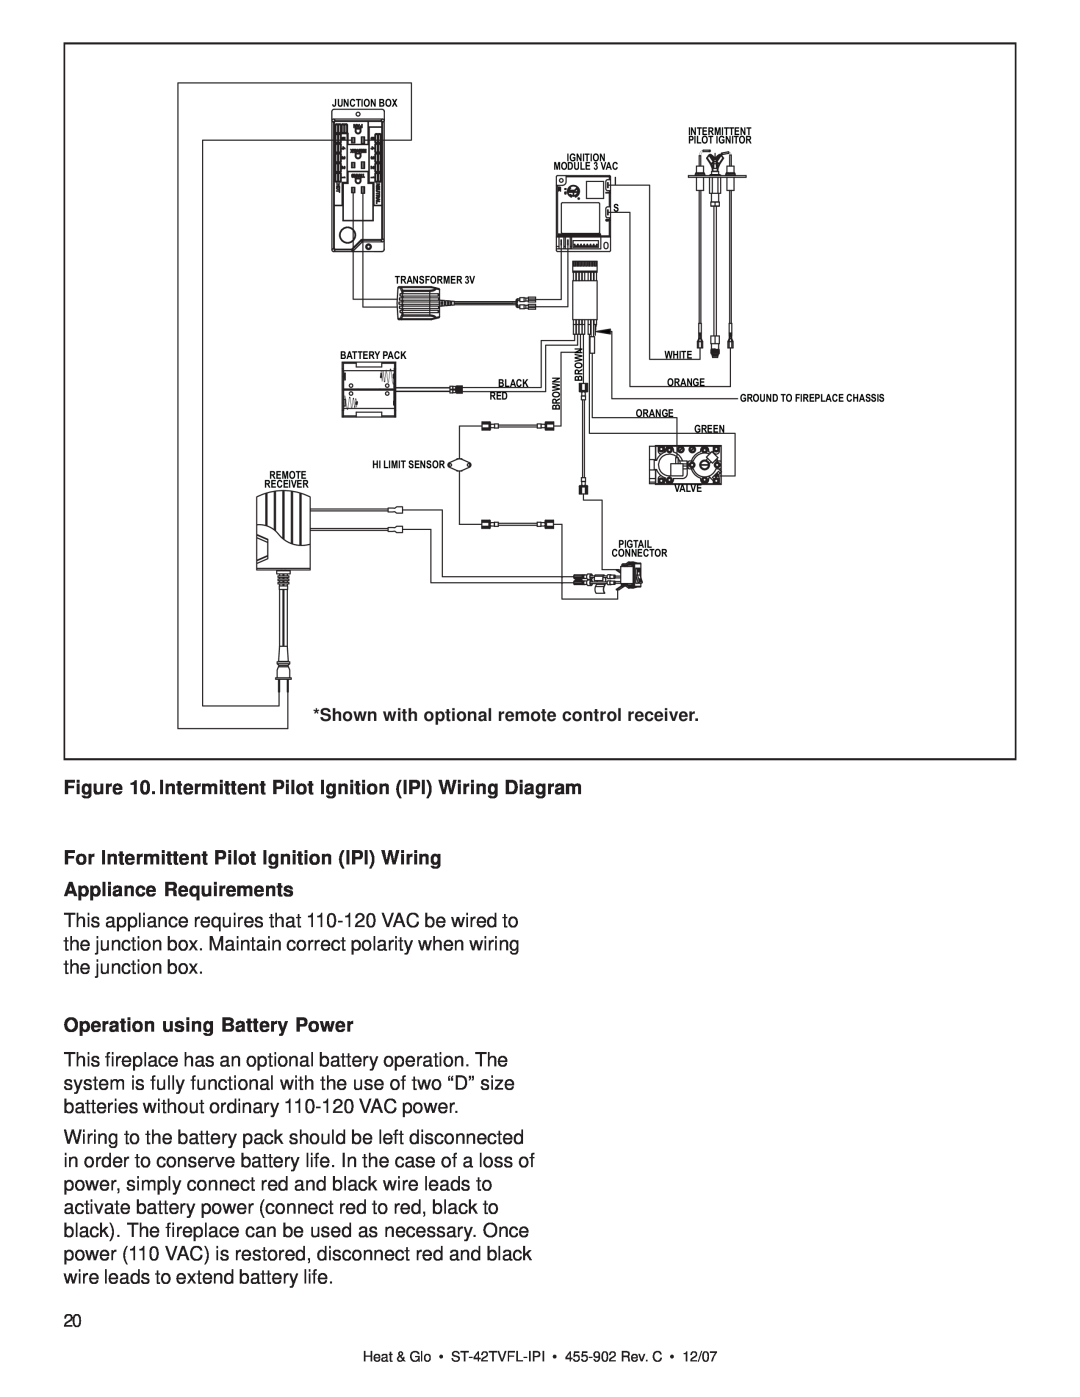 Heat & Glo LifeStyle ST-42TVFL-IPI owner manual For Intermittent Pilot Ignition IPI Wiring, Appliance Requirements 